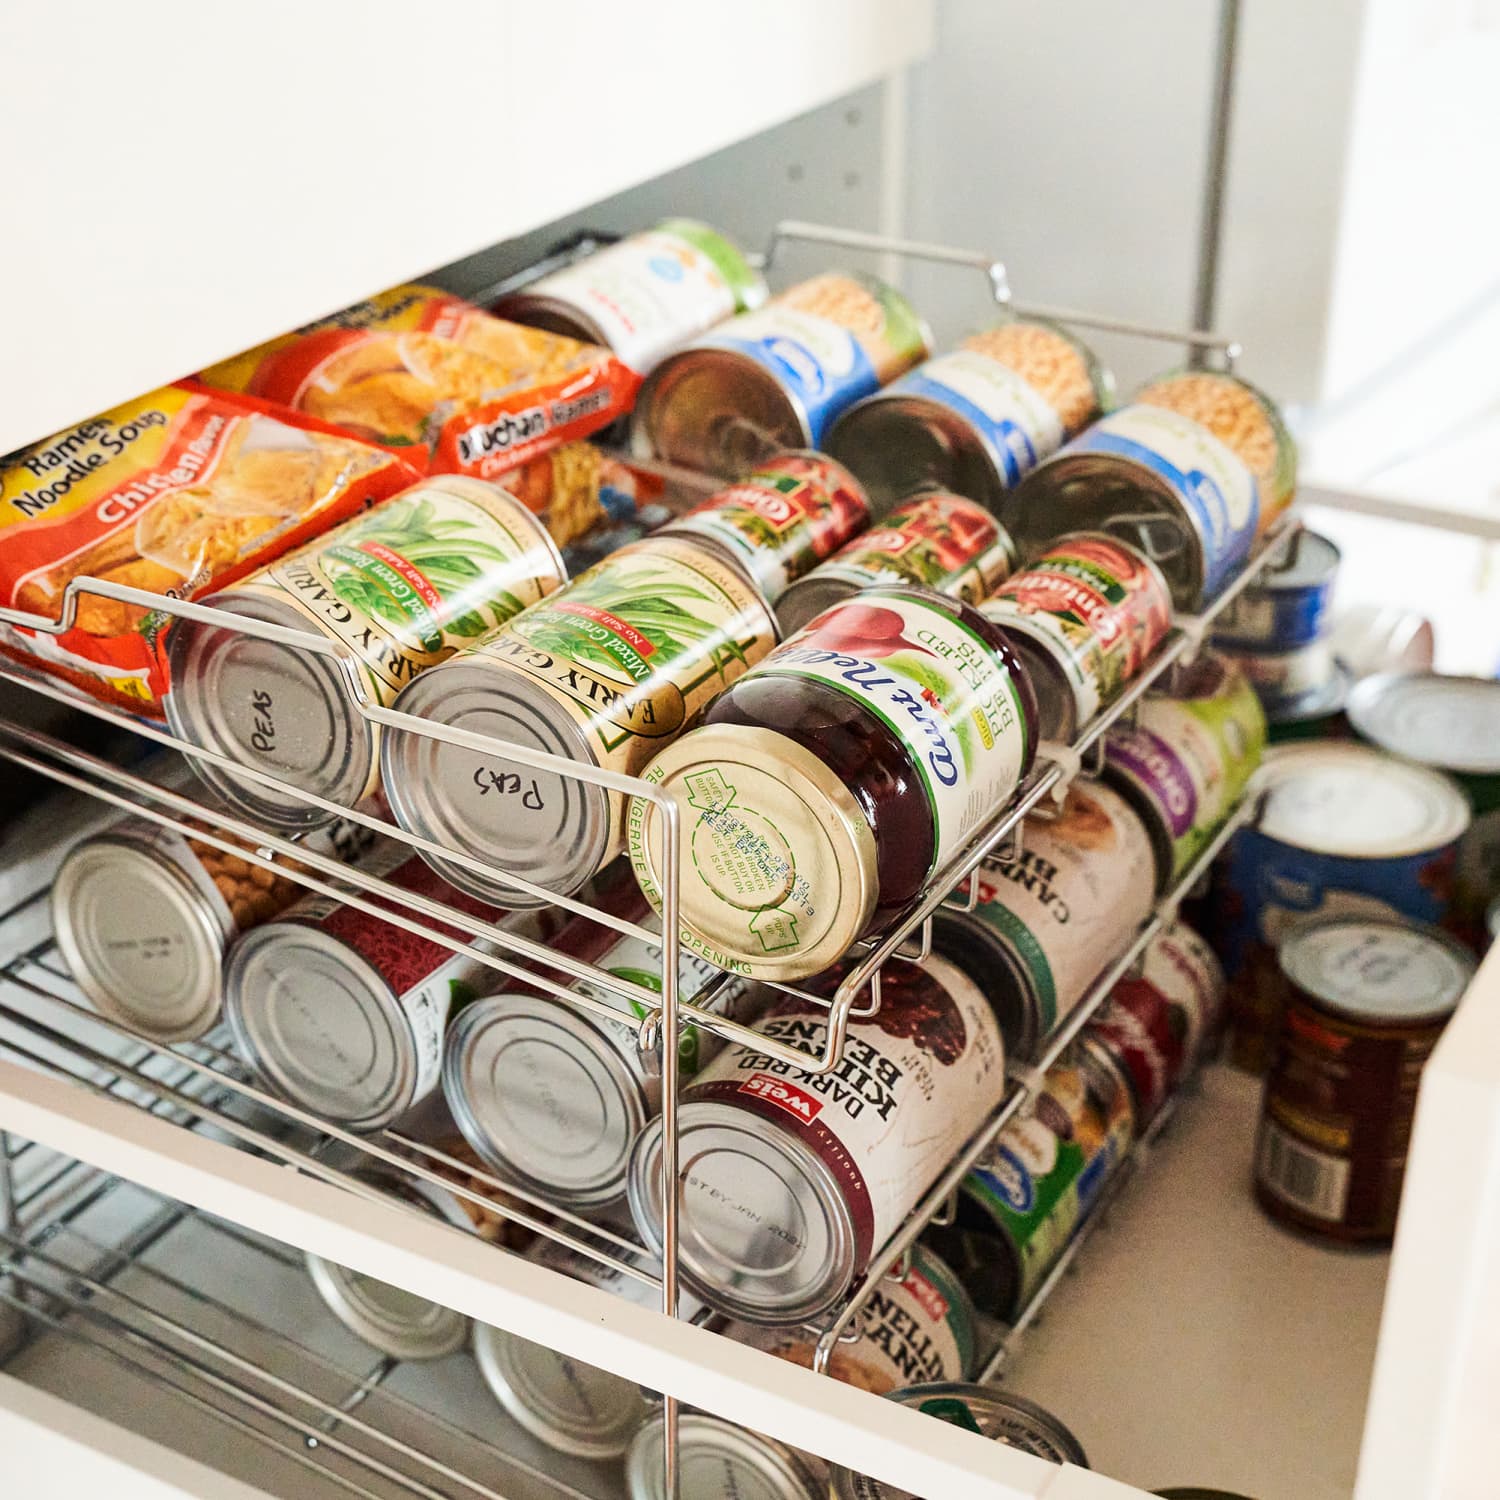 How To Store Unfinished Opened Canned Goods